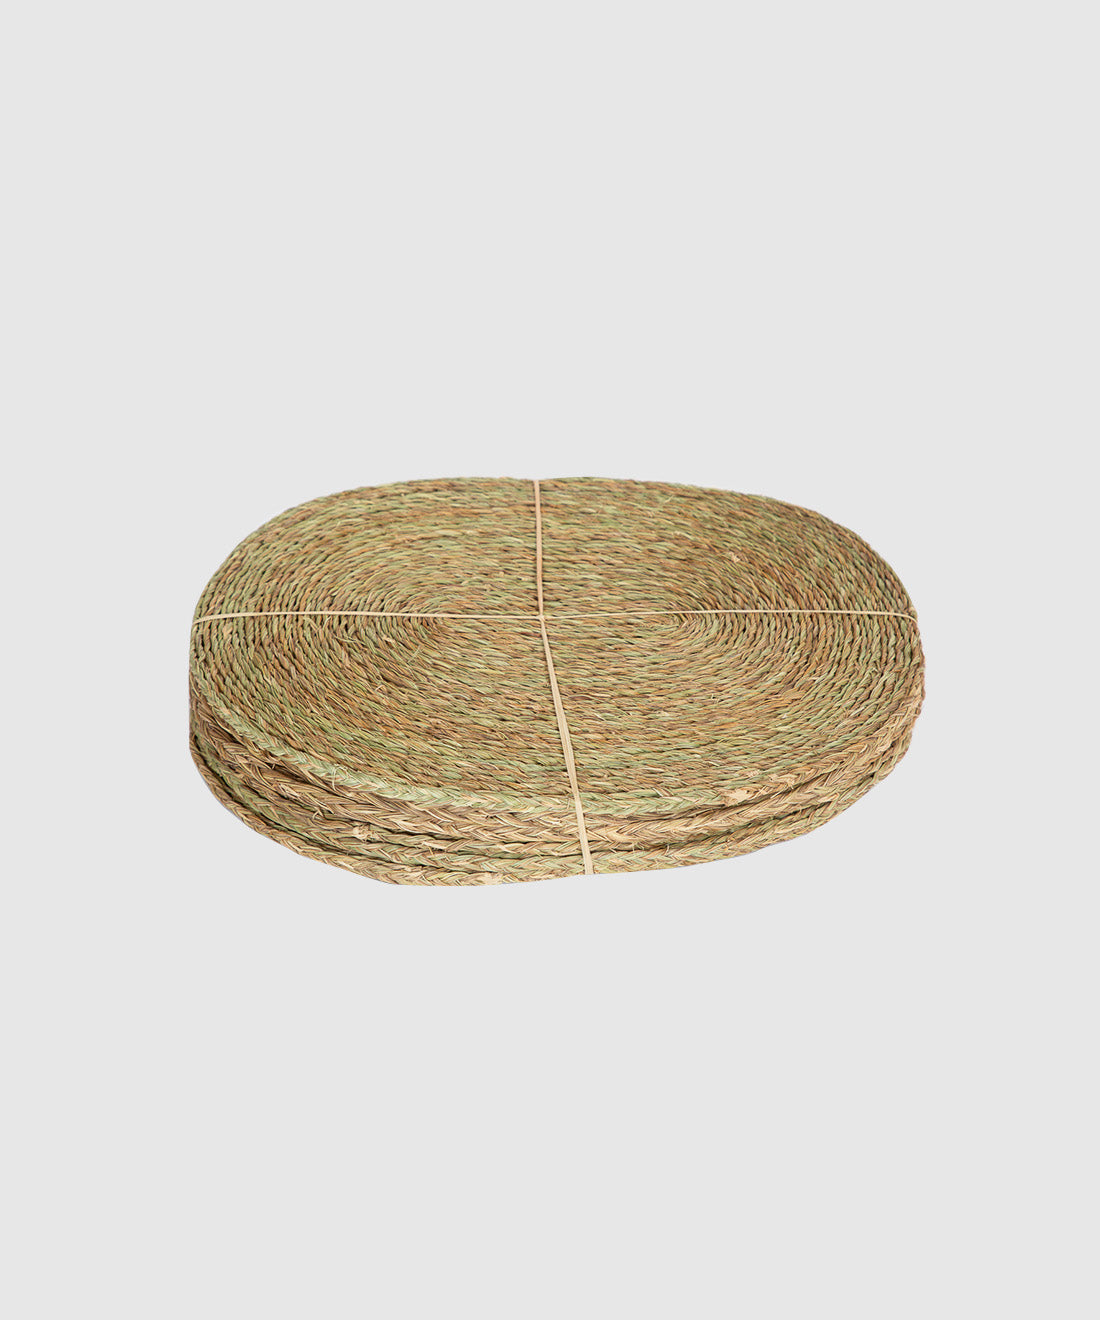 Woven Grass Oval Placemats, Set of 6